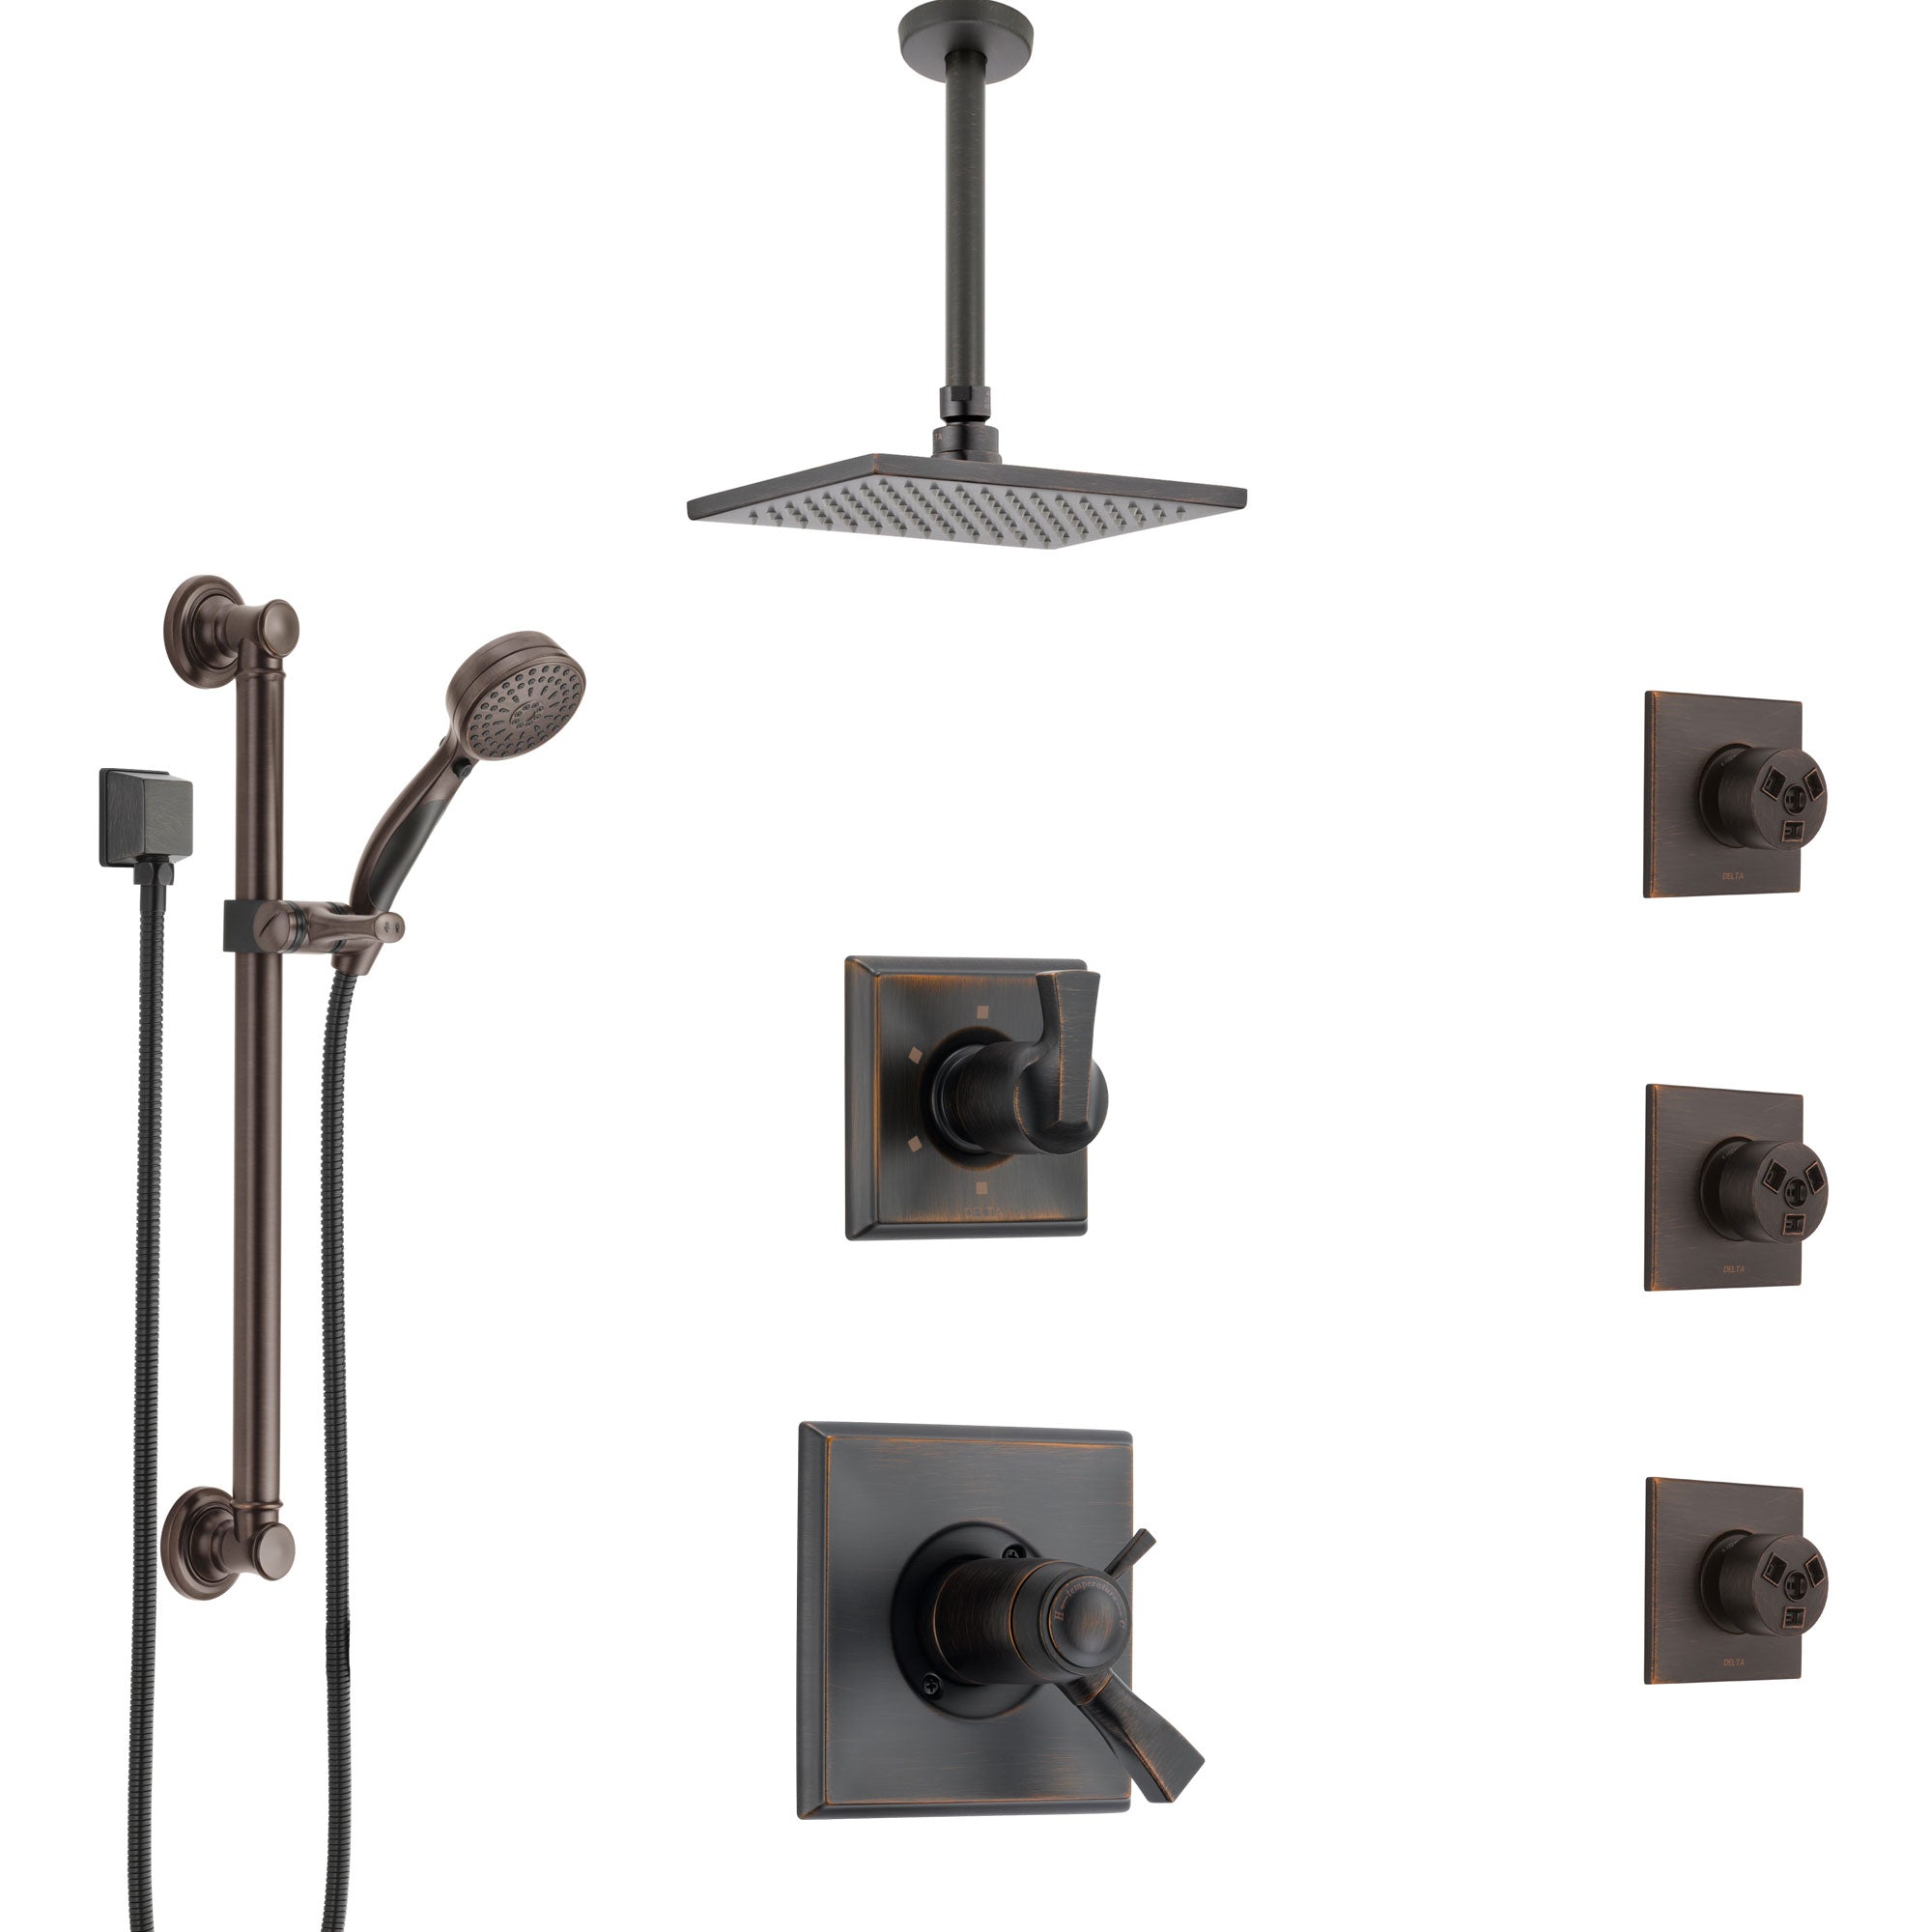 Delta Dryden Venetian Bronze Dual Thermostatic Control Shower System, Diverter, Ceiling Showerhead, 3 Body Sprays, and Grab Bar Hand Spray SS17T512RB4